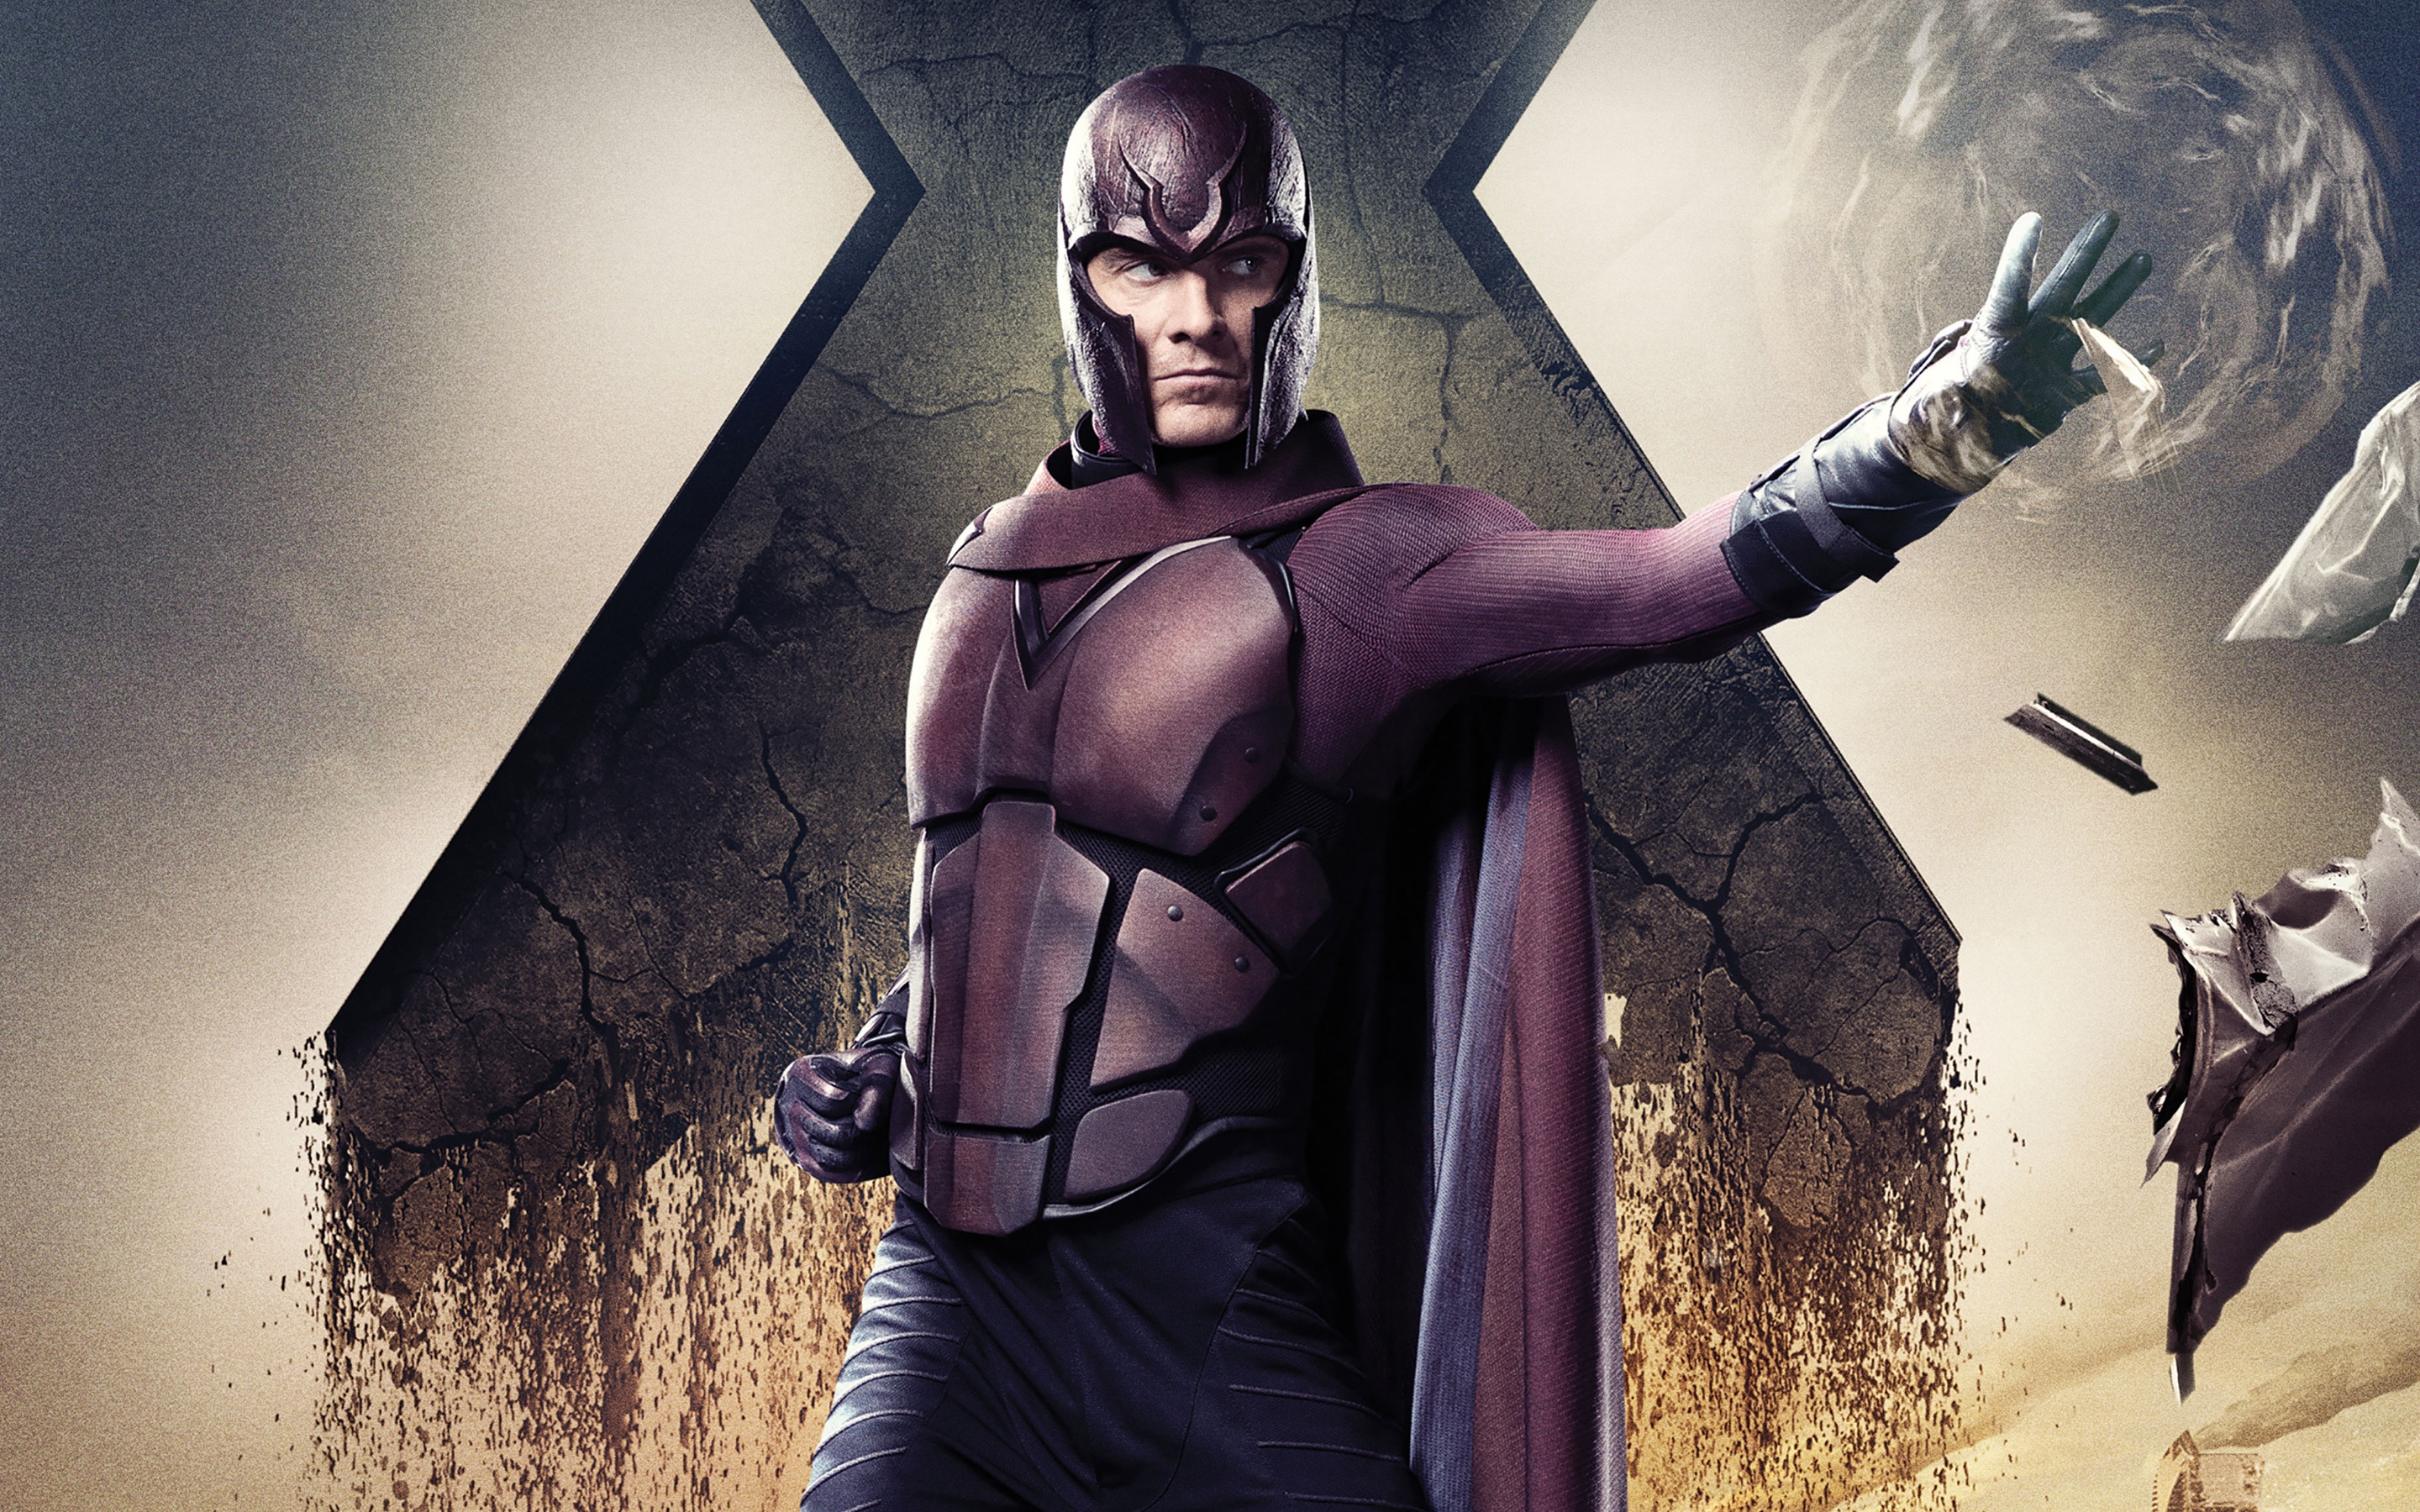 X Men Days Of Future Past Wallpaper Posted By Christopher Thompson